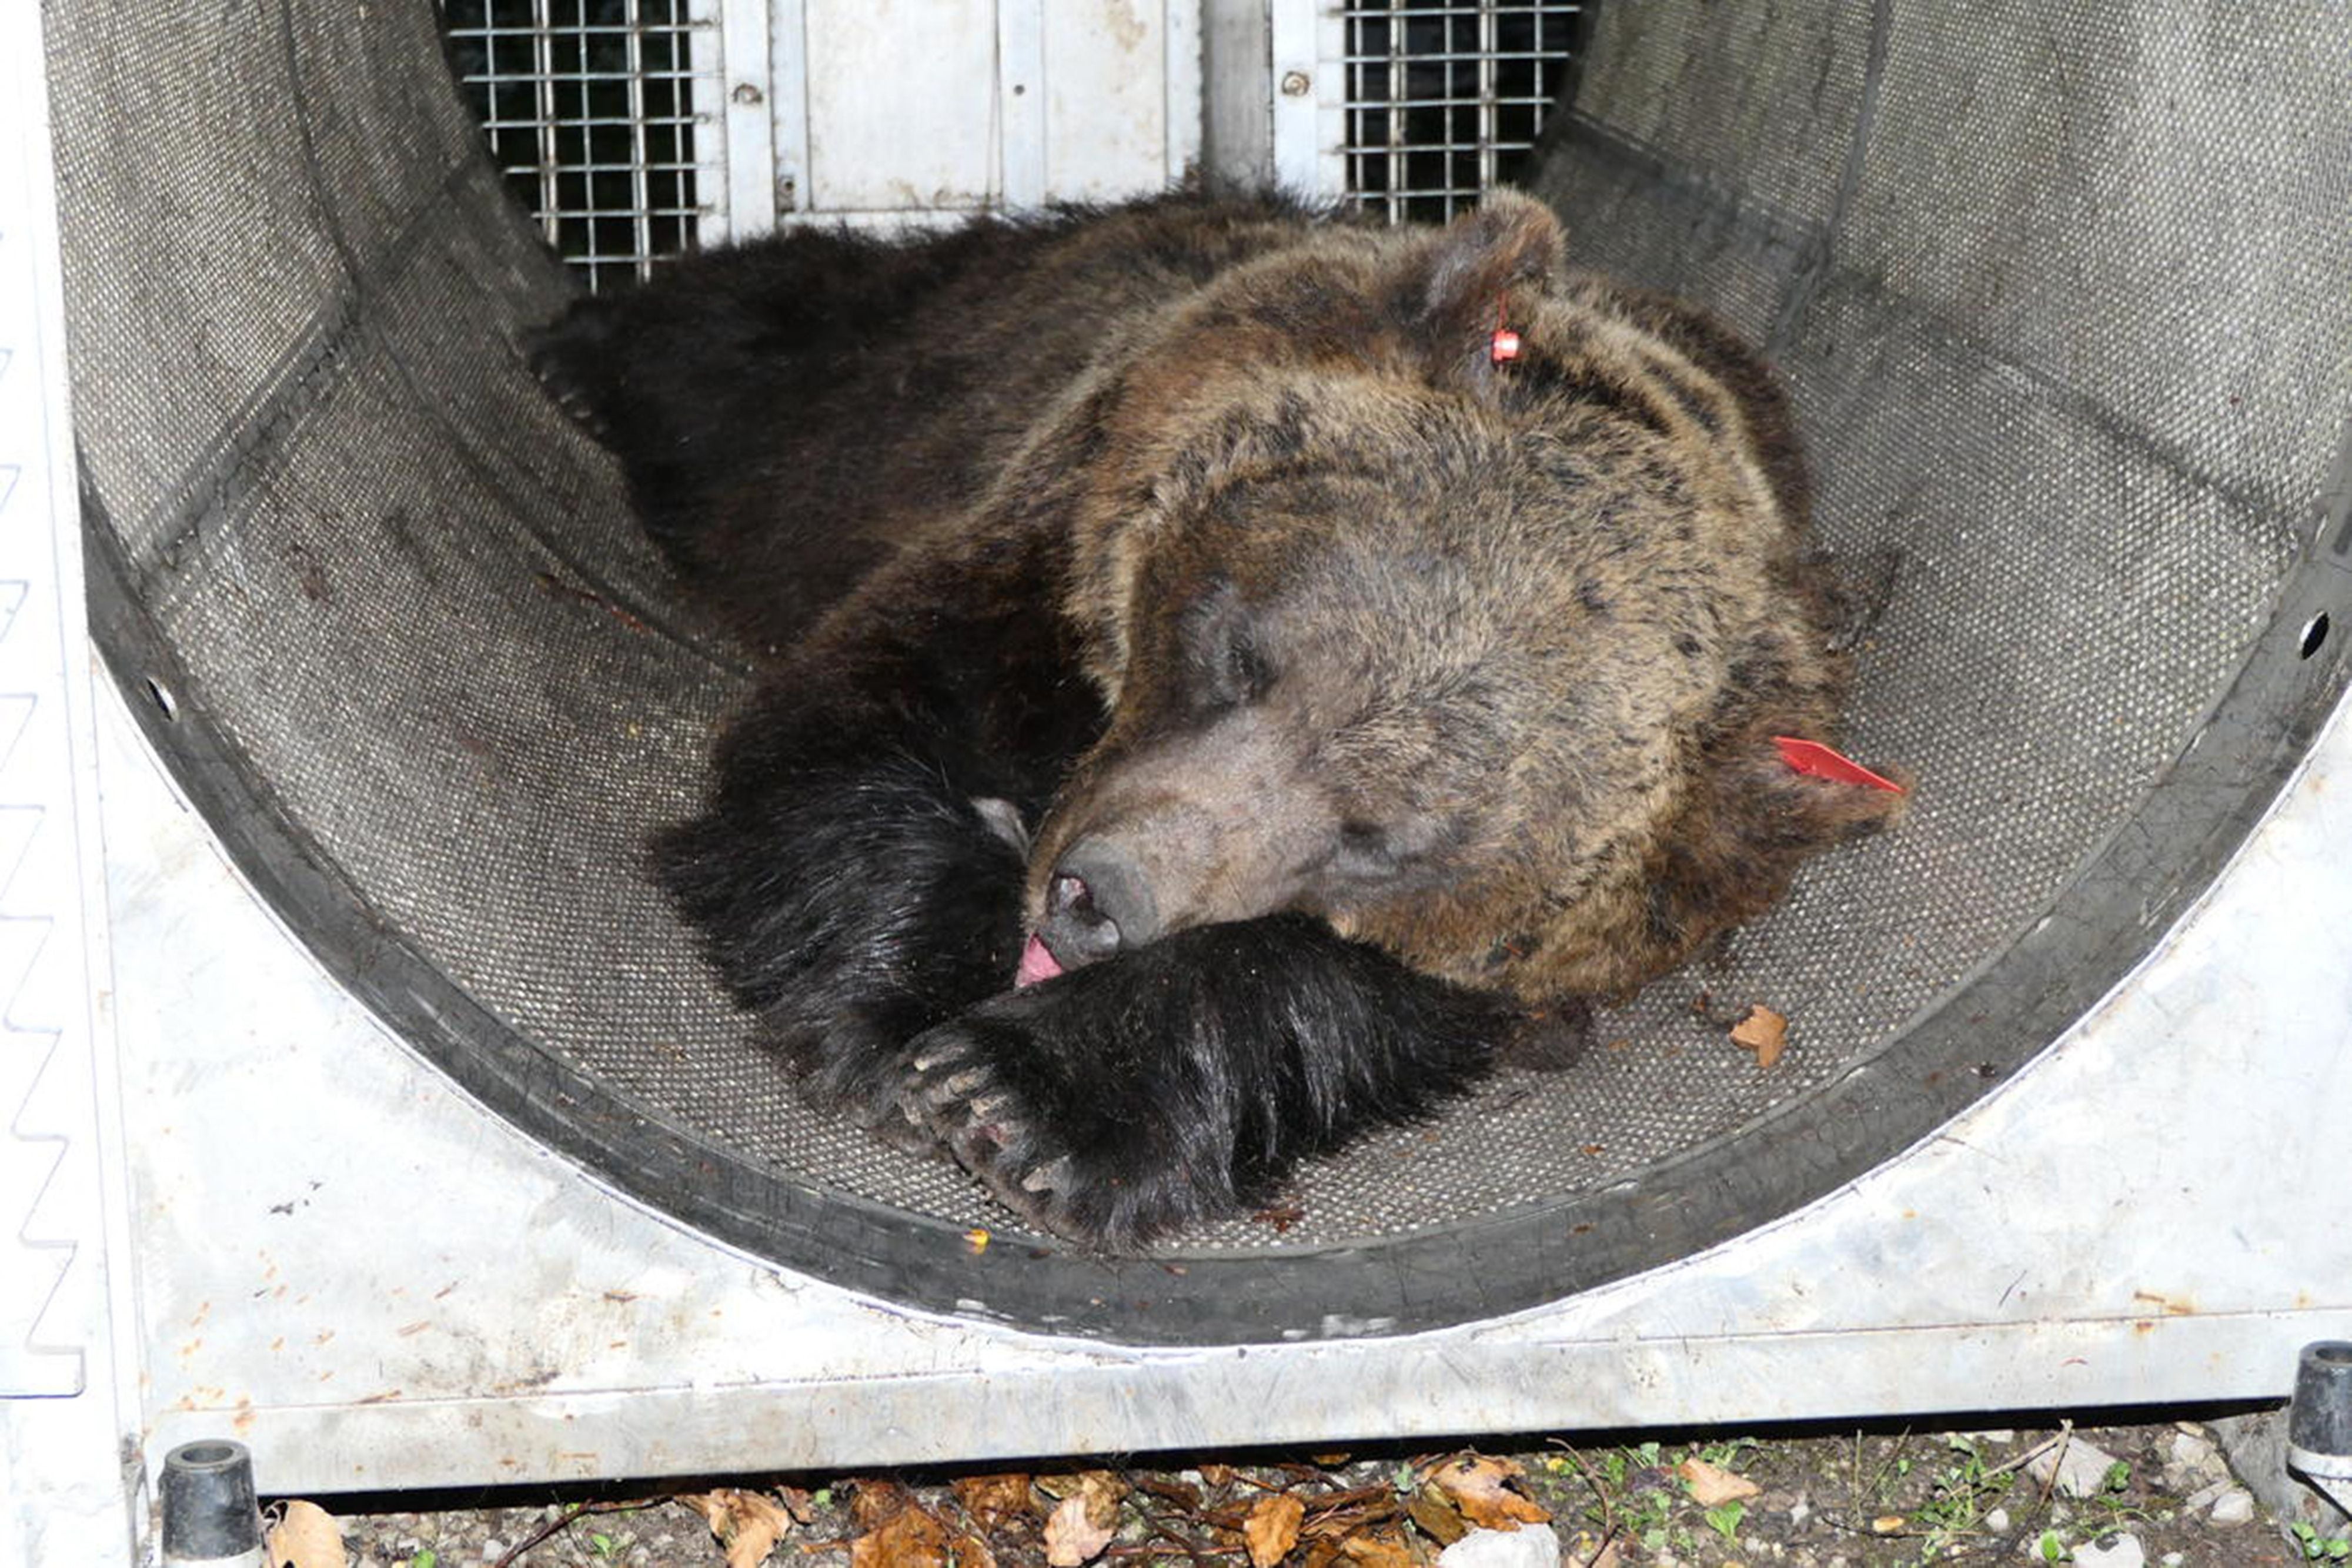 The bear, known as JJ4, was sedated in 2020 (pictured) after an attack - but she may not be the culprit this time